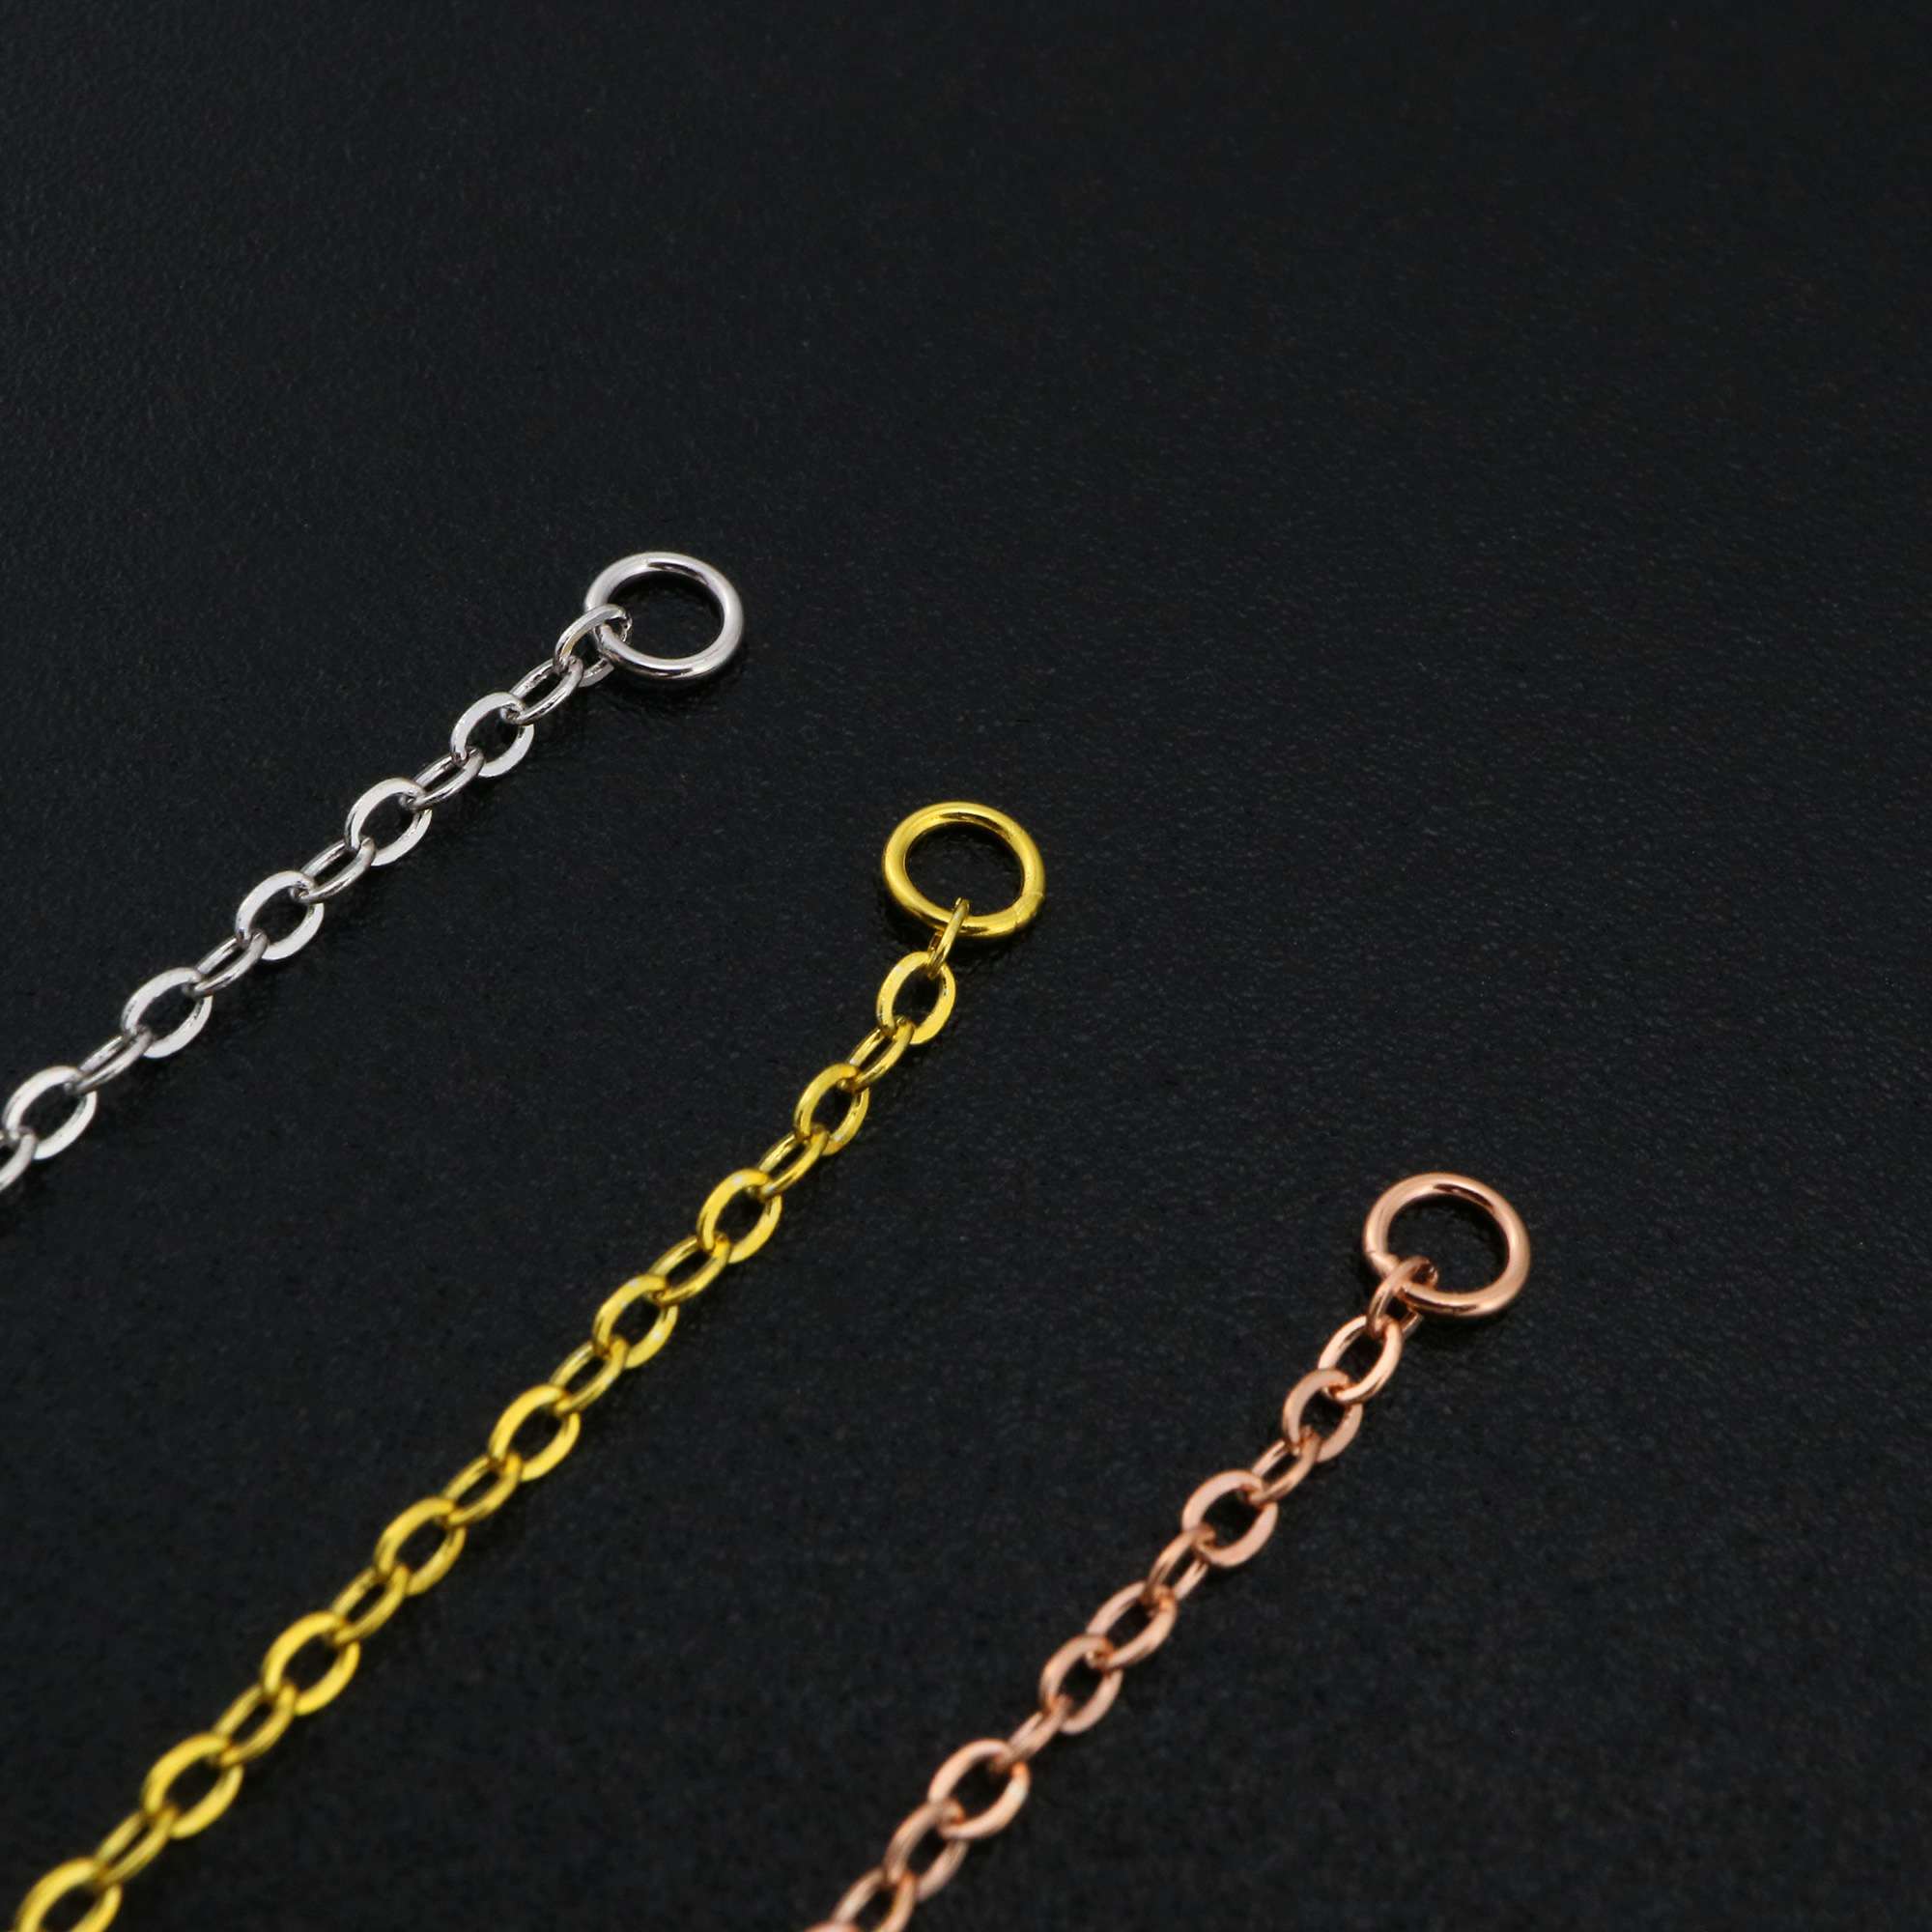 5pcs 3-8CM Extension Chain with Spring Ring Clasp for Necklace Rose Gold Plated Solid 925 Sterling Silver DIY Supplies 1320016 - Click Image to Close